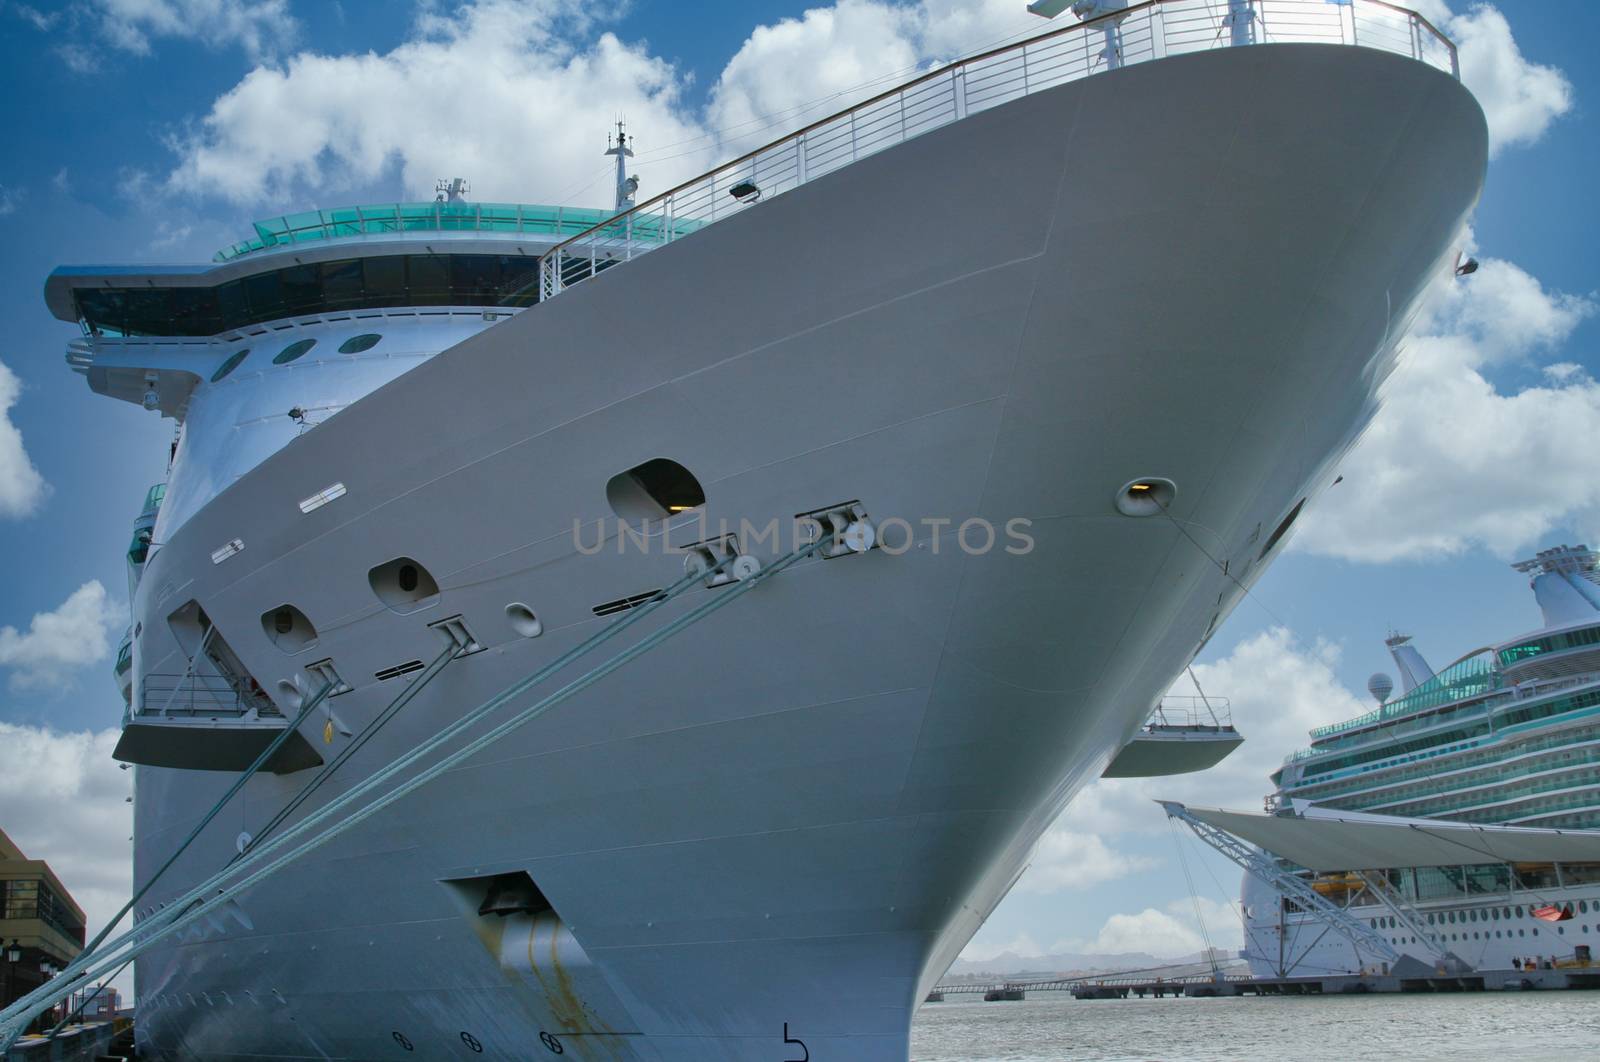 Huge cruise ship tied up at a dock